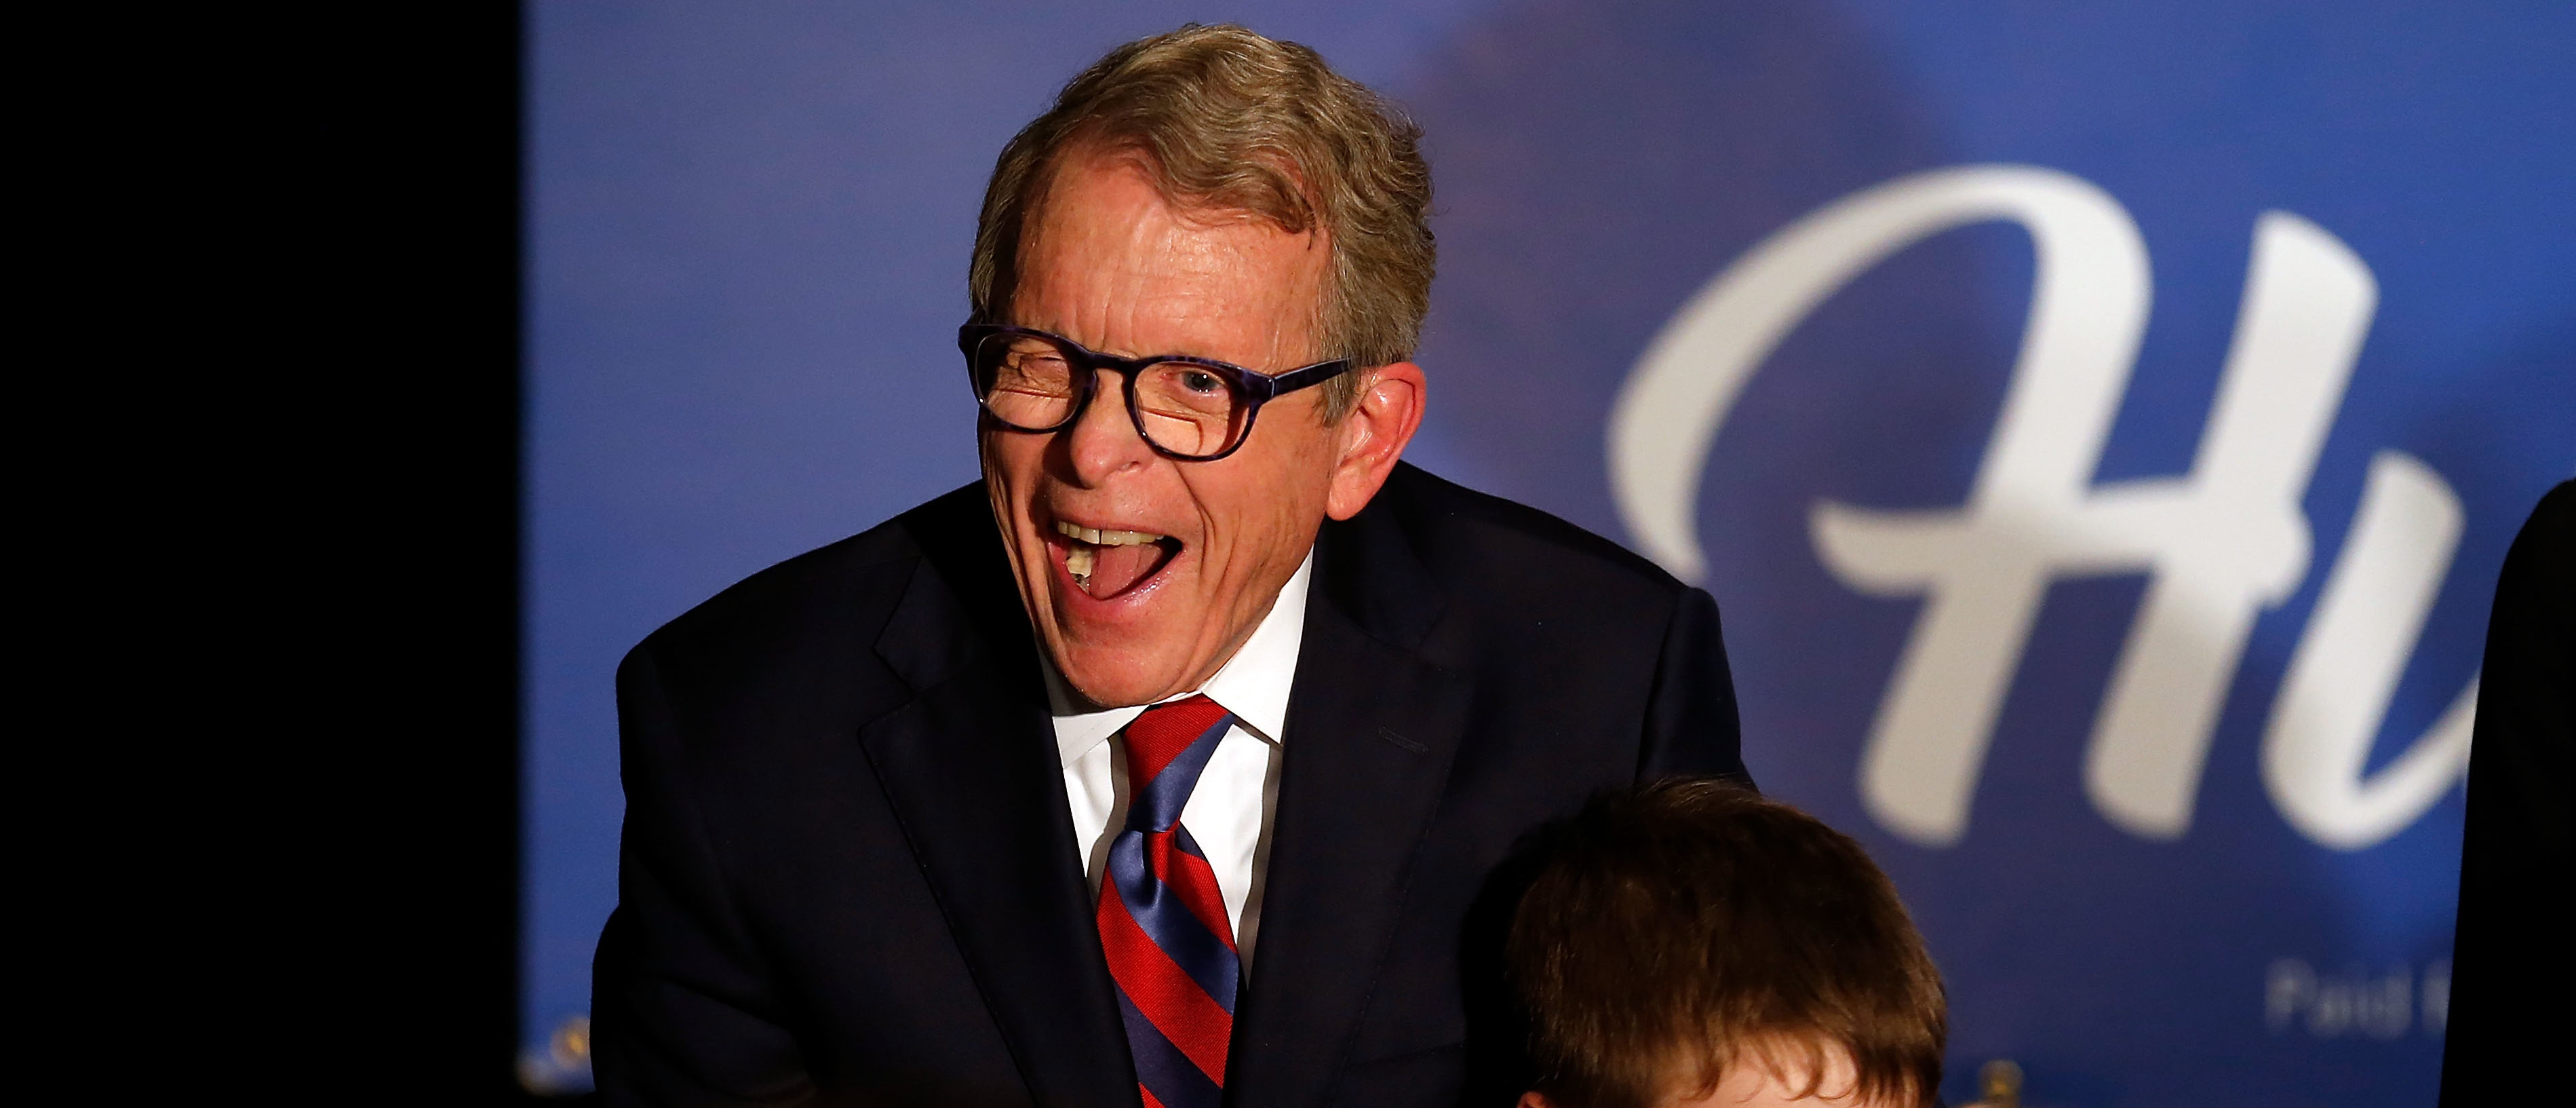 COLUMBUS, OH - NOVEMBER 02: Republican Gubernatorial Candidate Ohio Attorney General Mike DeWine stands on stage with one of his grandchildren after making a late pitch to supporters during a campaign event at the Boat House at Confluence Park on November 2, 2018 in Columbus, Ohio. DeWine is running against former Ohio Attorney General and Democratic Gubernatorial Candidate Richard Cordray for the governorship of Ohio, currently held by Republican and 2016 Presidential candidate John Kasich, who has reached his term limit. (Photo by Kirk Irwin/Getty Images)